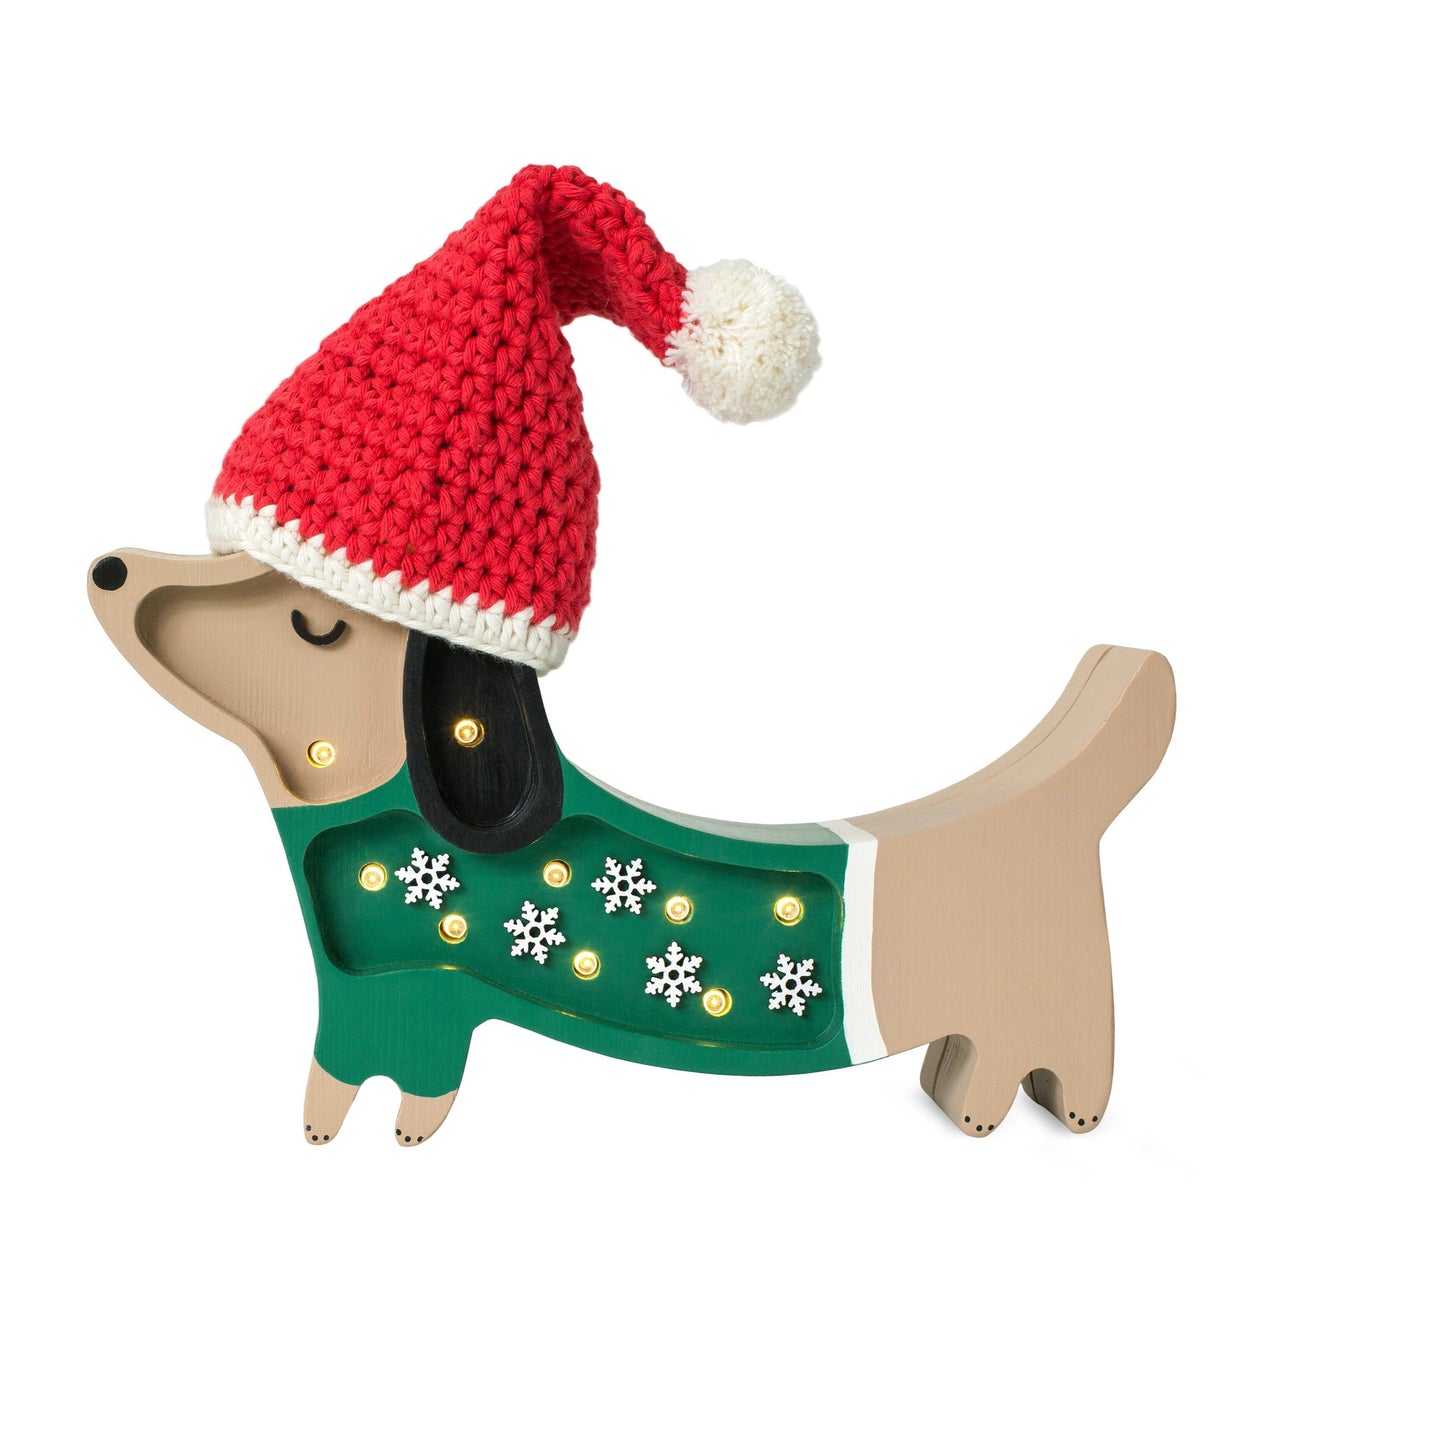 Little Lights Holiday Mini Puppy Lamp I Limited Edition by Little Lights US